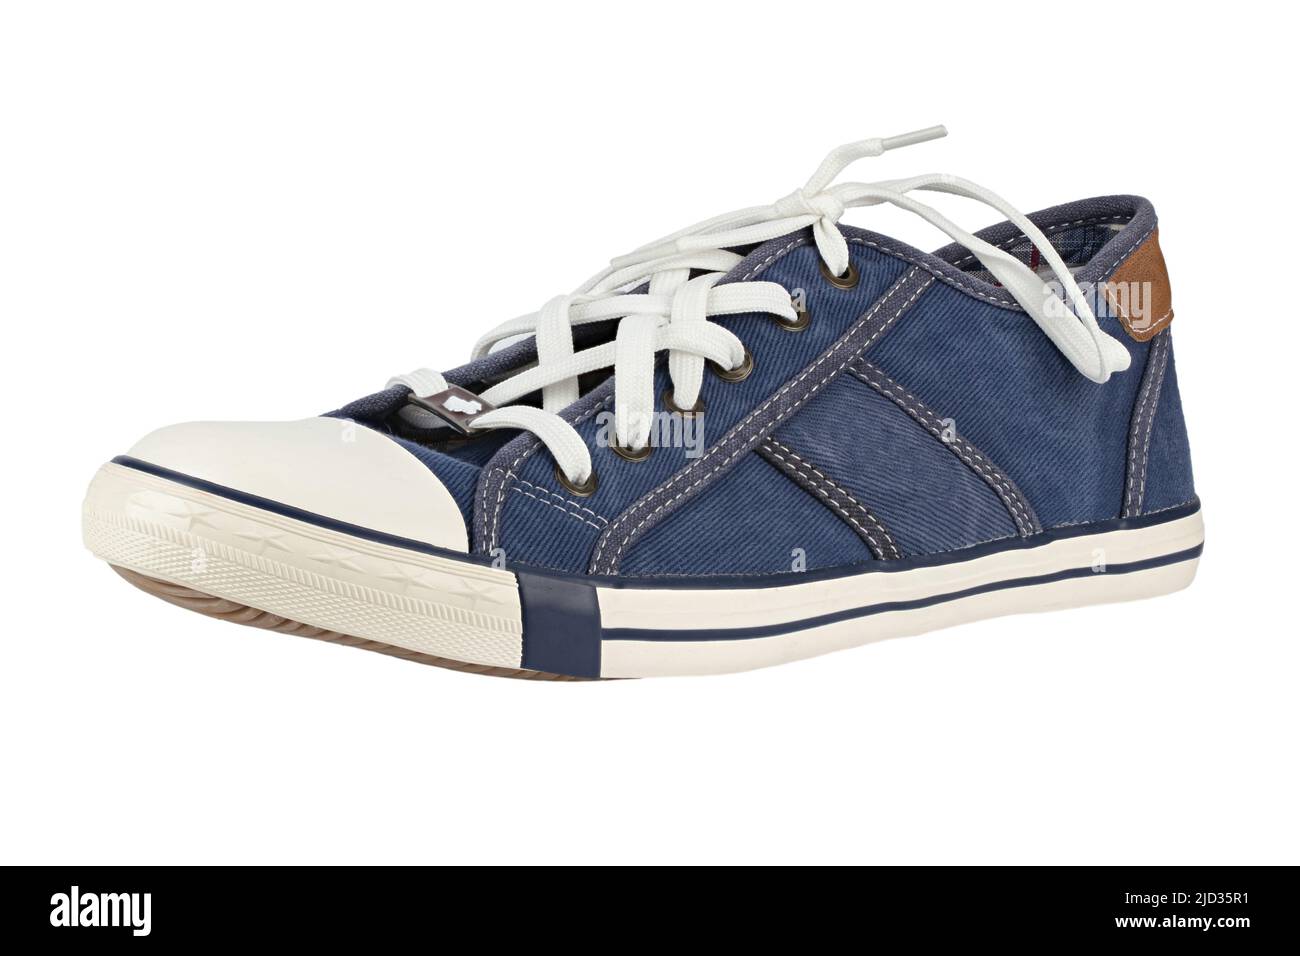 gumshoe classic old school sneakers on white background file contains clipping path 2JD35R1